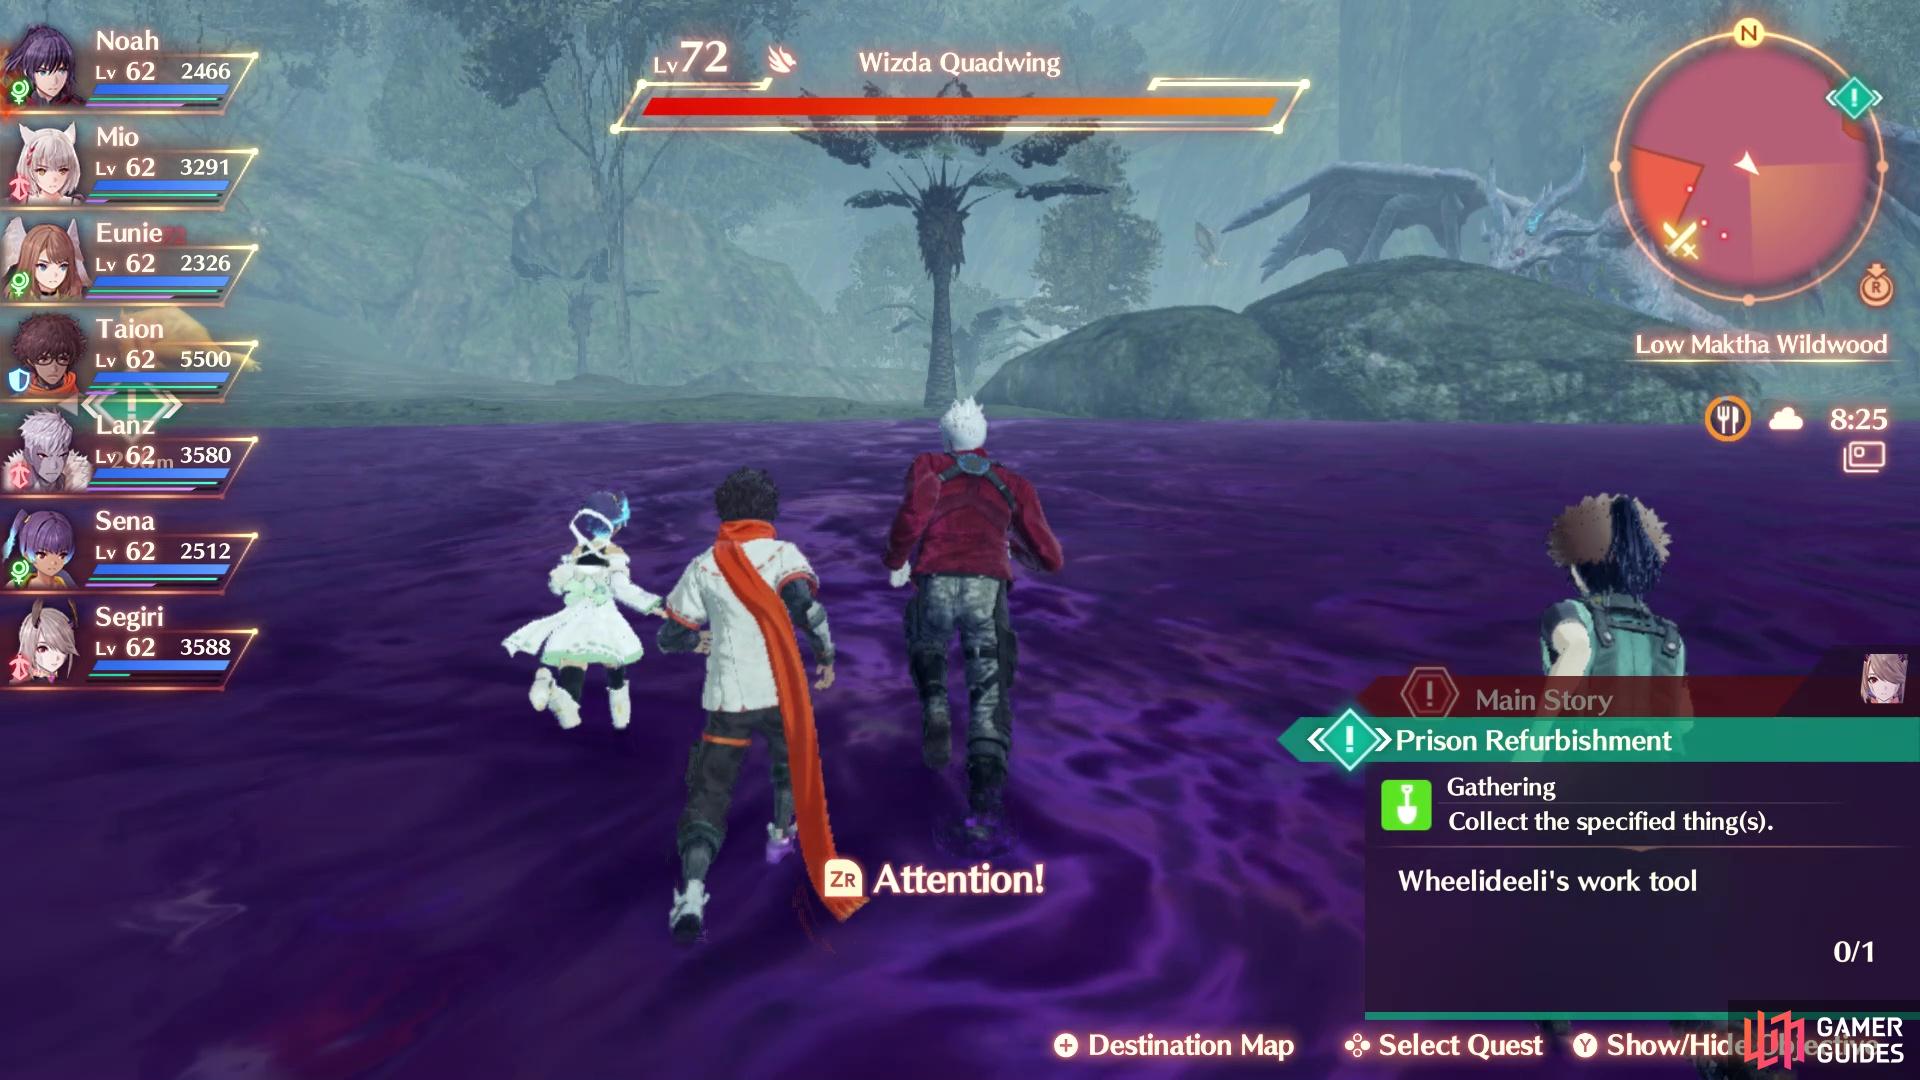 You will be able to walk on the poison pools thanks to Segiri's skill